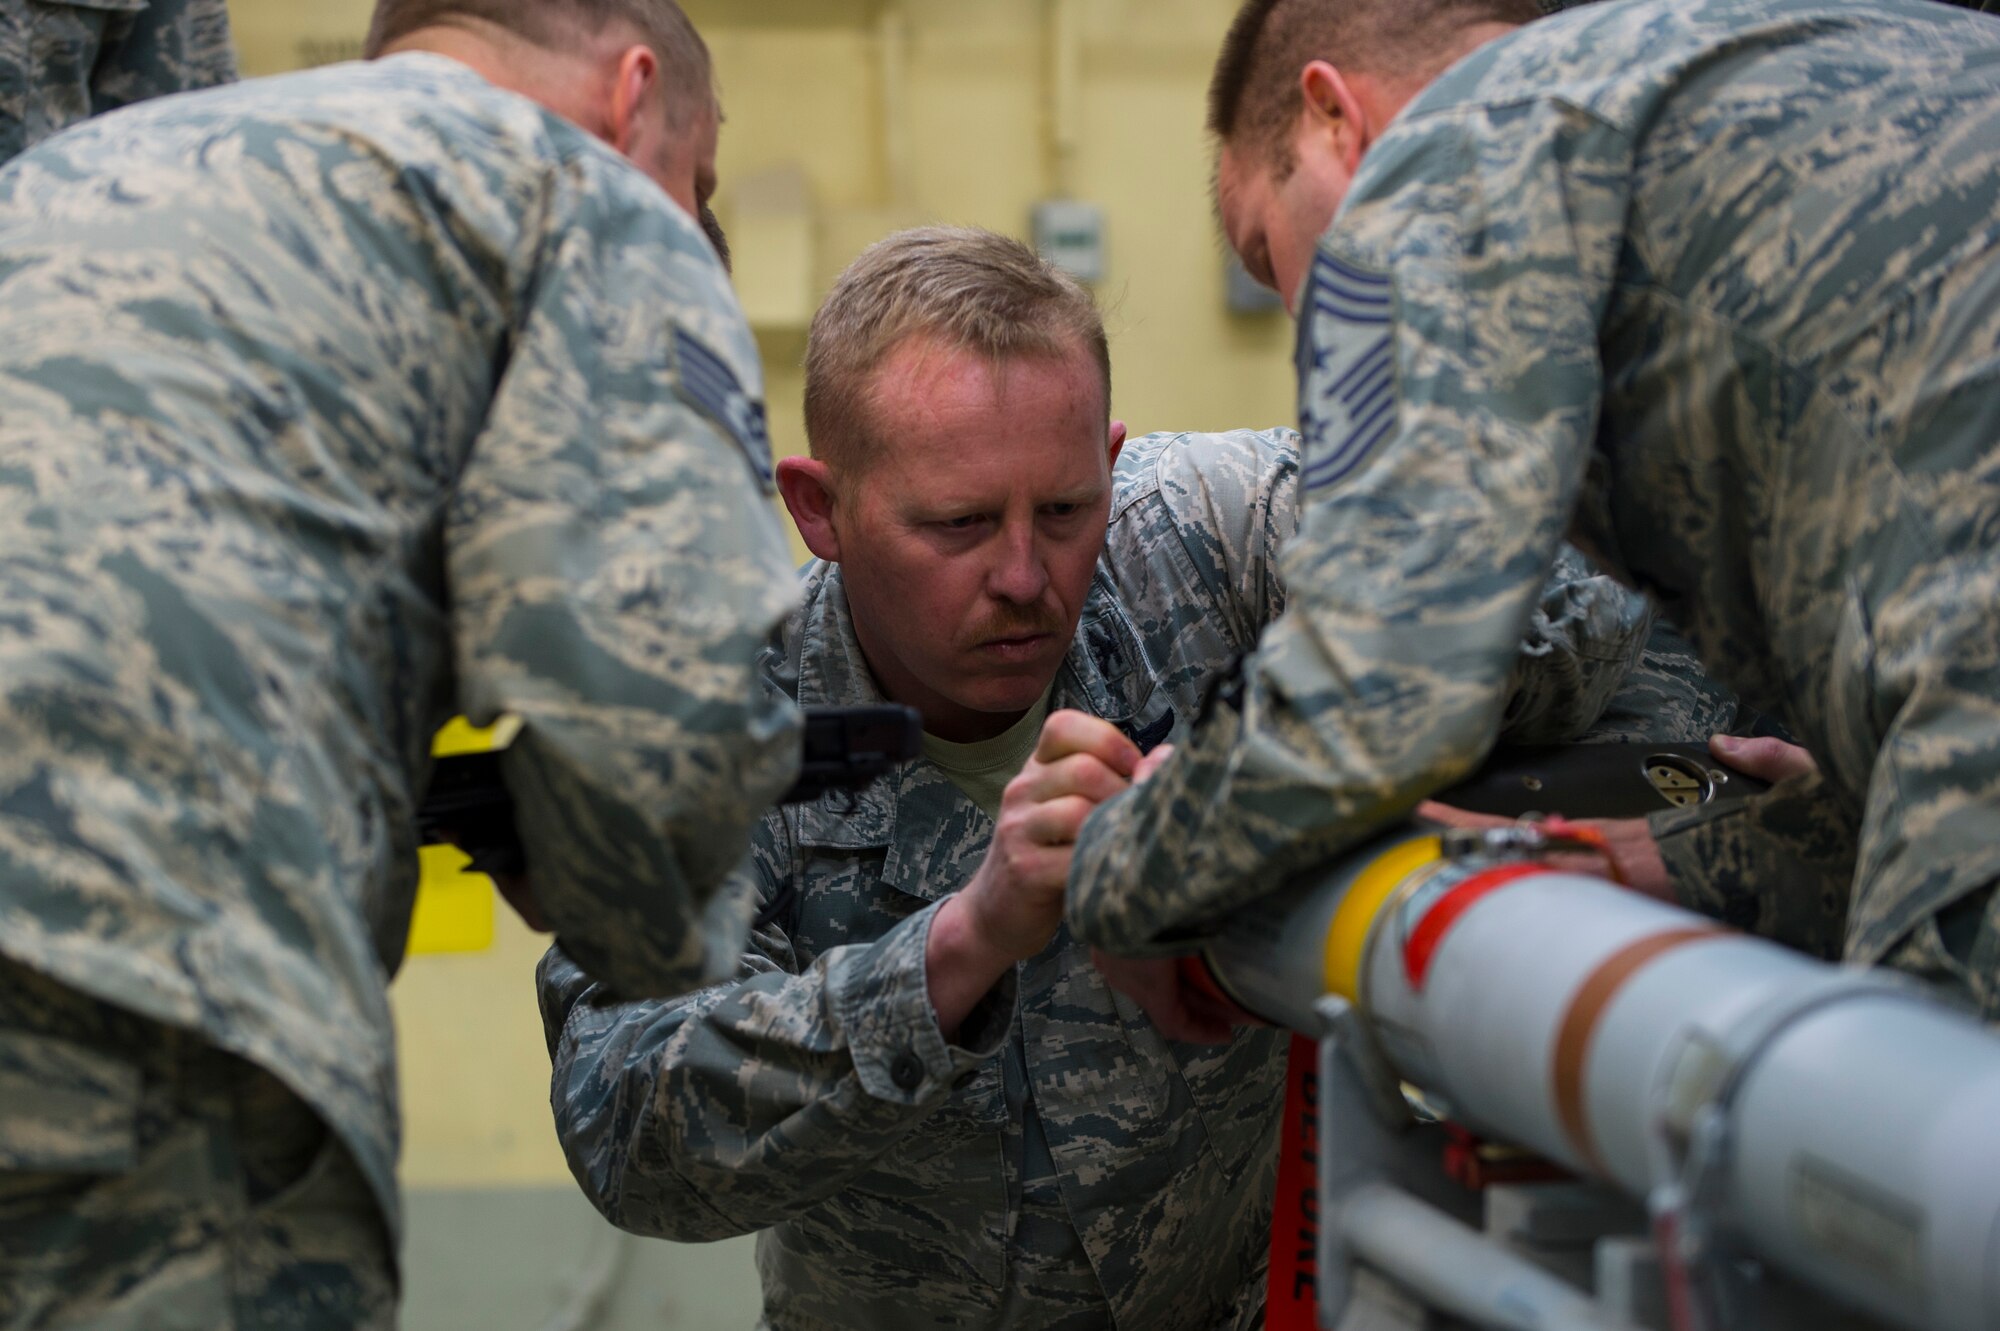 U.S. Air Force Col. Joseph McFall, 52nd Fighter Wing commander, assisted by Chief Master Sgt. Edwin Ludwigsen, 52nd FW command chief, builds an Air Intercept Missile 9 during a Saber leadership “out and about” event at Spangdahlem Air Base, Germany, March 27, 2017. Wing leadership learned the full spectrum of munitions building to include, testing, inspection, configuration, maintenance, and transportation. (U.S. Air Force photo by Senior Airman Dawn M. Weber)